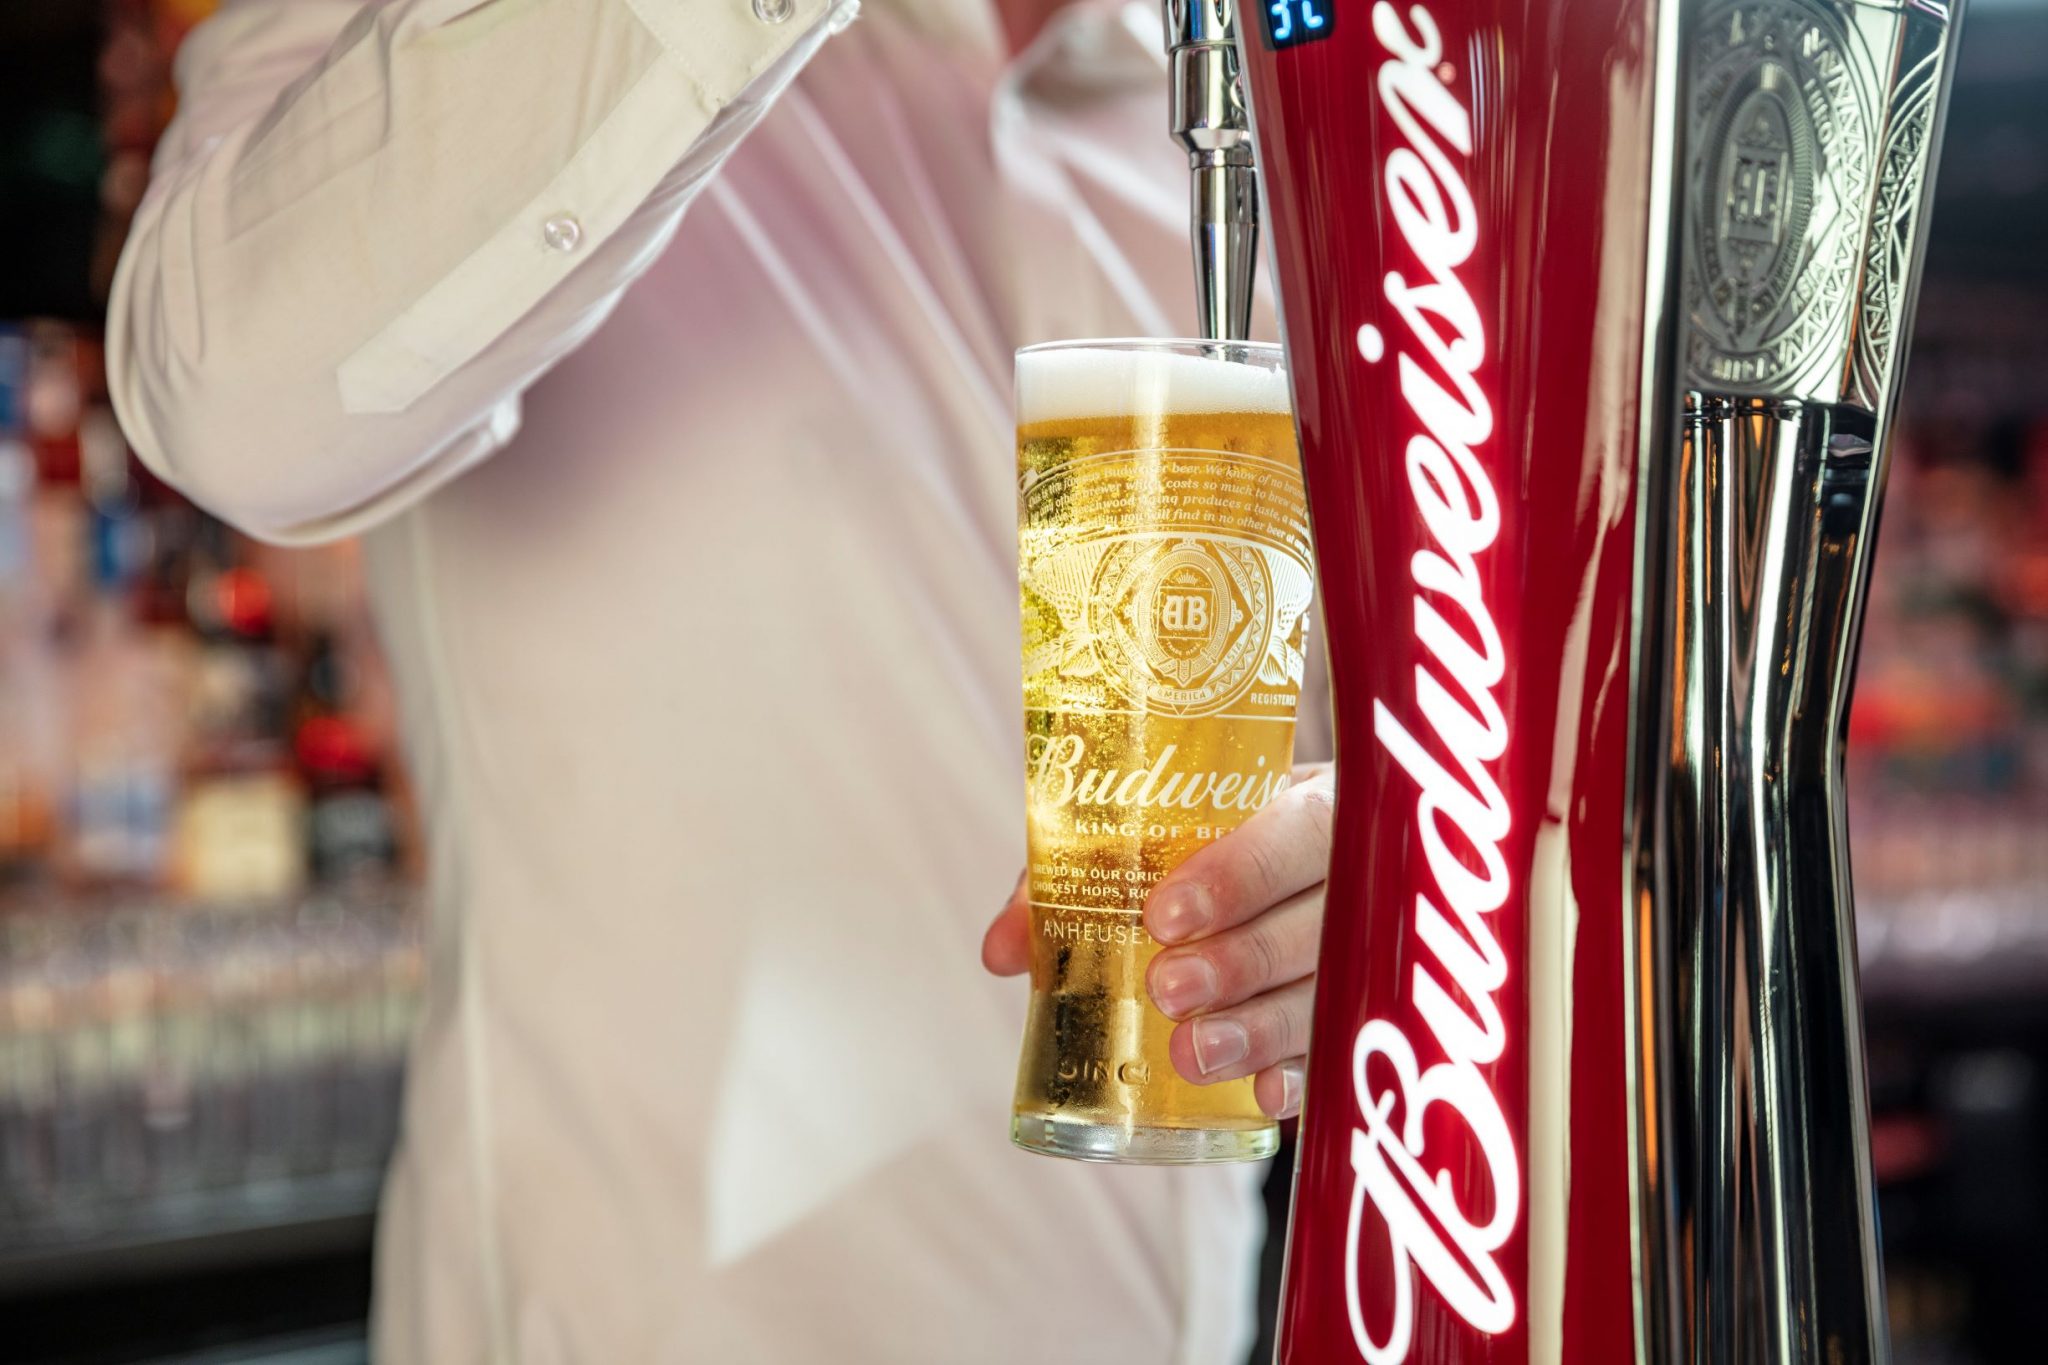 Ireland to be global launchpad for Budweiser’s new brand ID Drinks